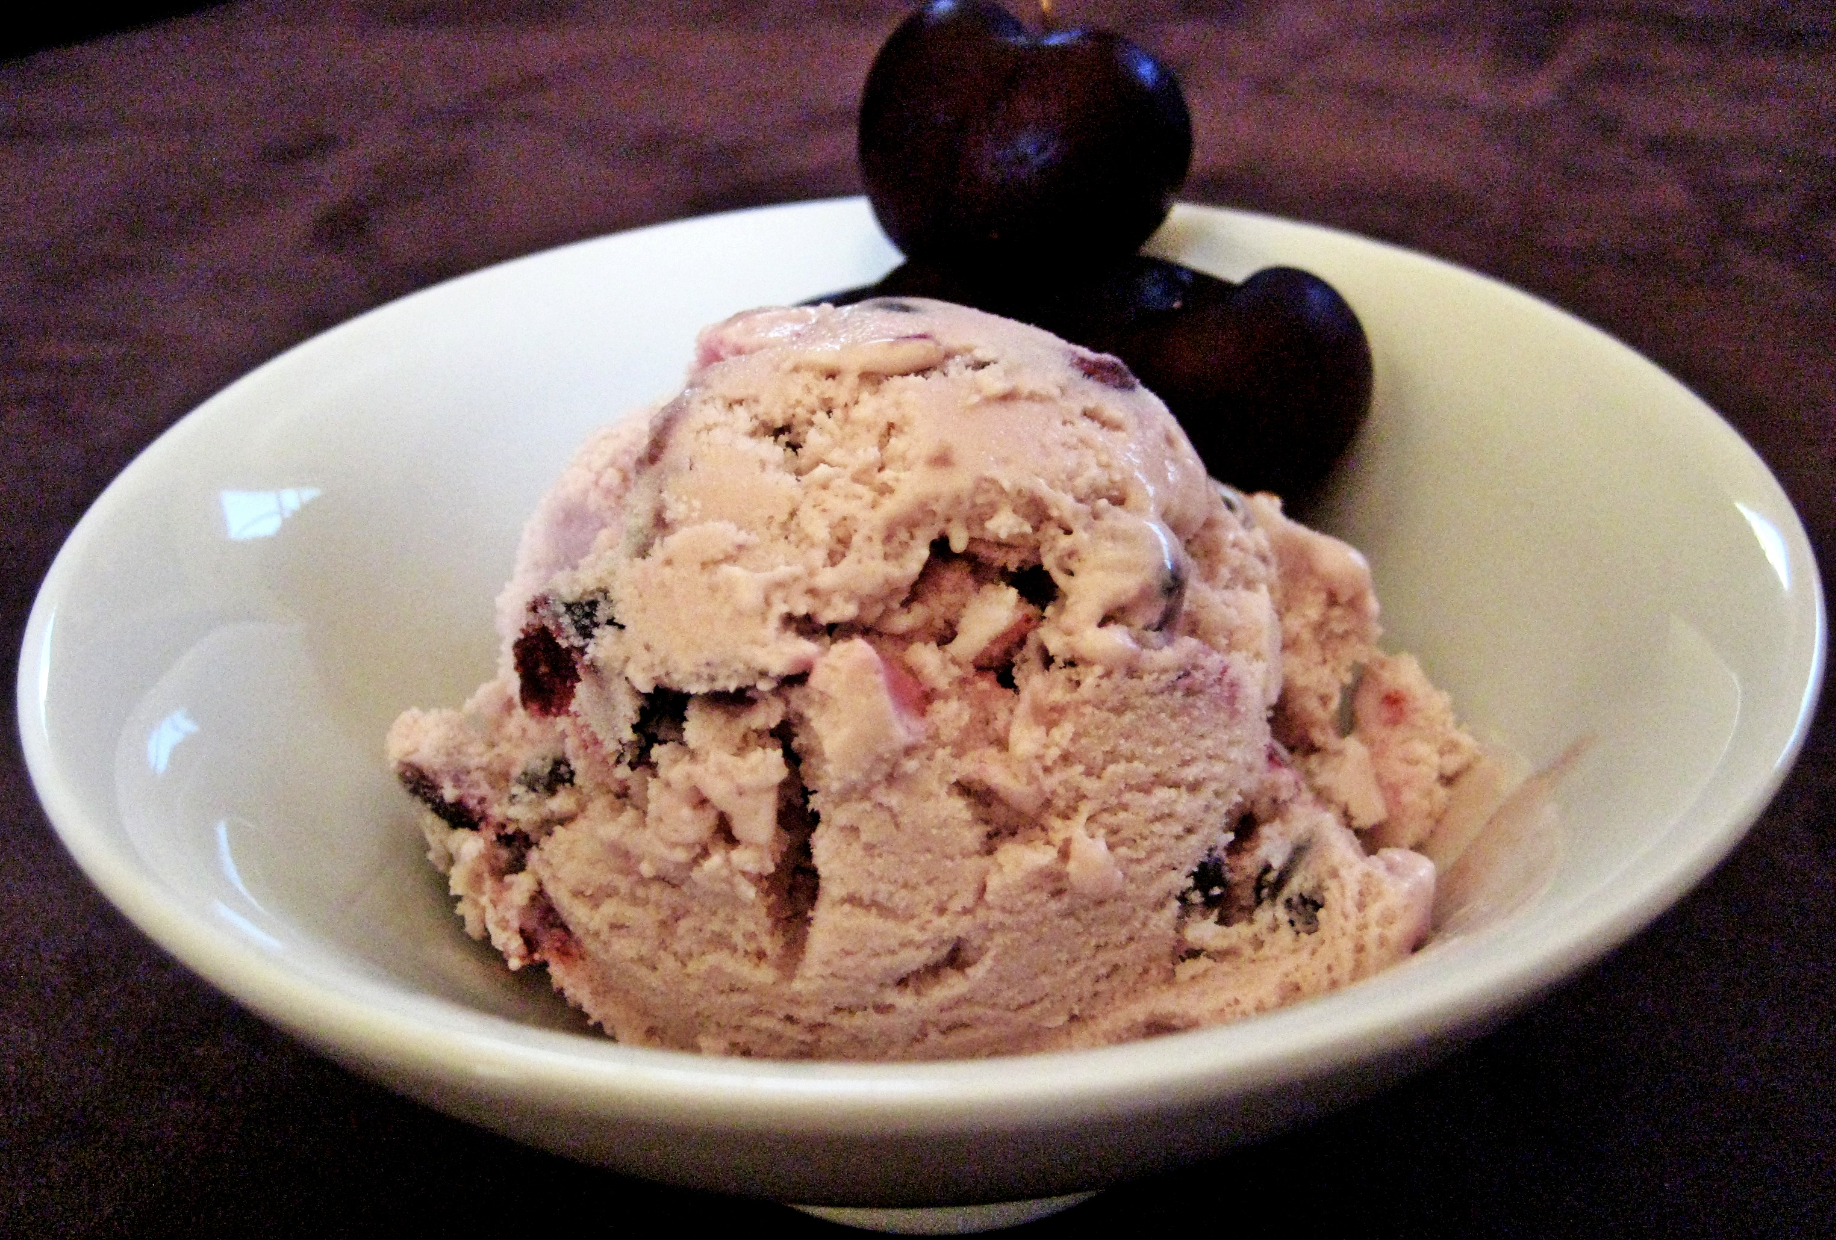 A delectable scoop of black cherry ice cream garnished with fresh cherries, set against a backdrop of vintage recipe cards and historical ice cream paraphernalia